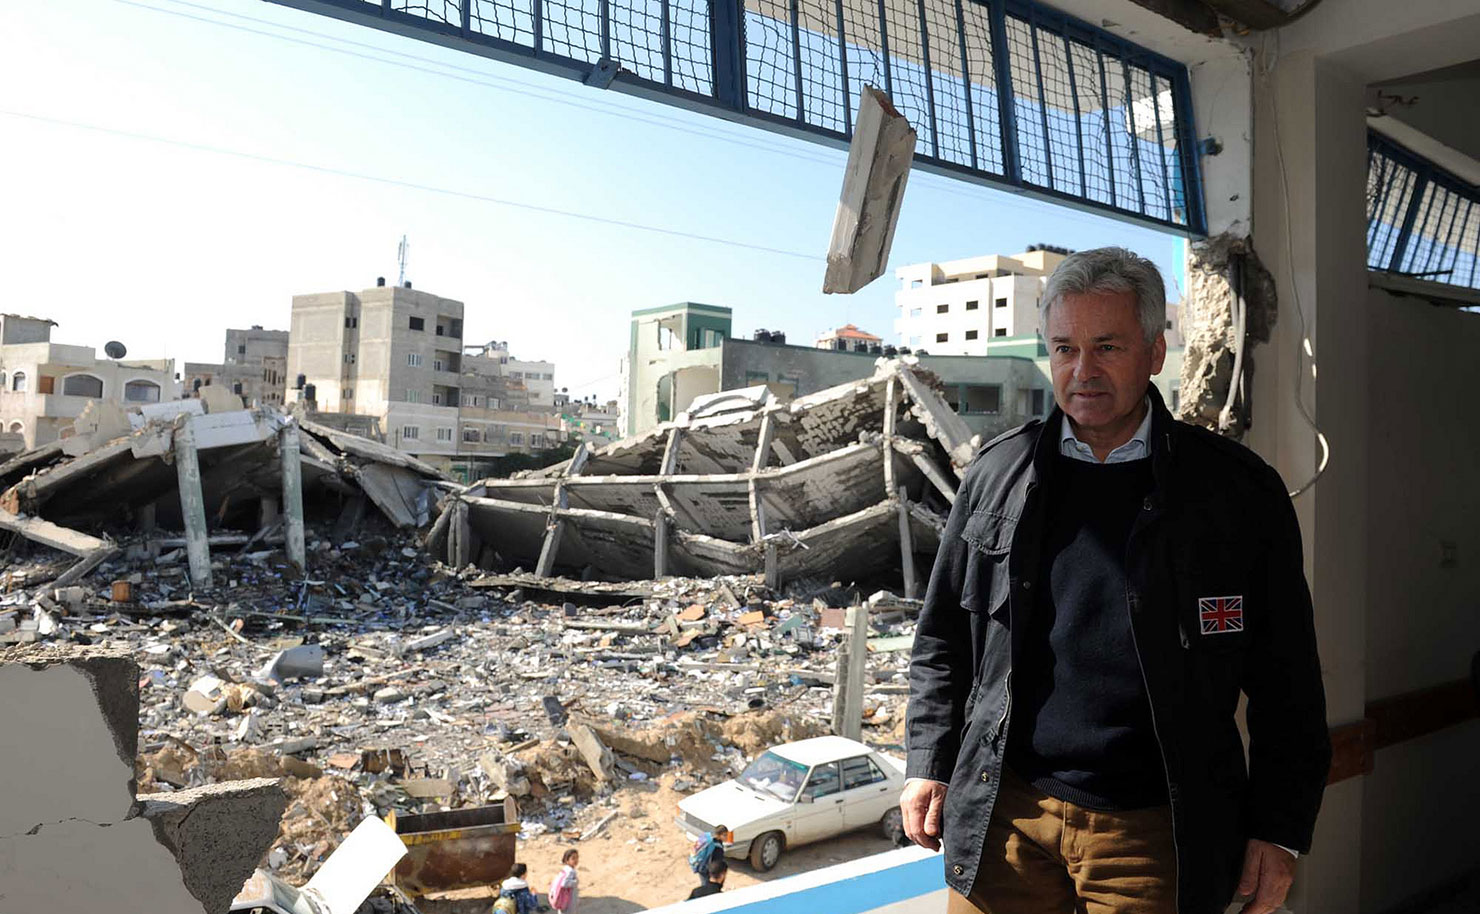 UK Minister of State for International Development, Alan Duncan MP, visits Gaza, 10th December 2012. He is the first British minister to visit Gaza since the ceasefire entered into force on 21 November. (IMAGE: UNRWA/Shareef Sarhan, Flickr).